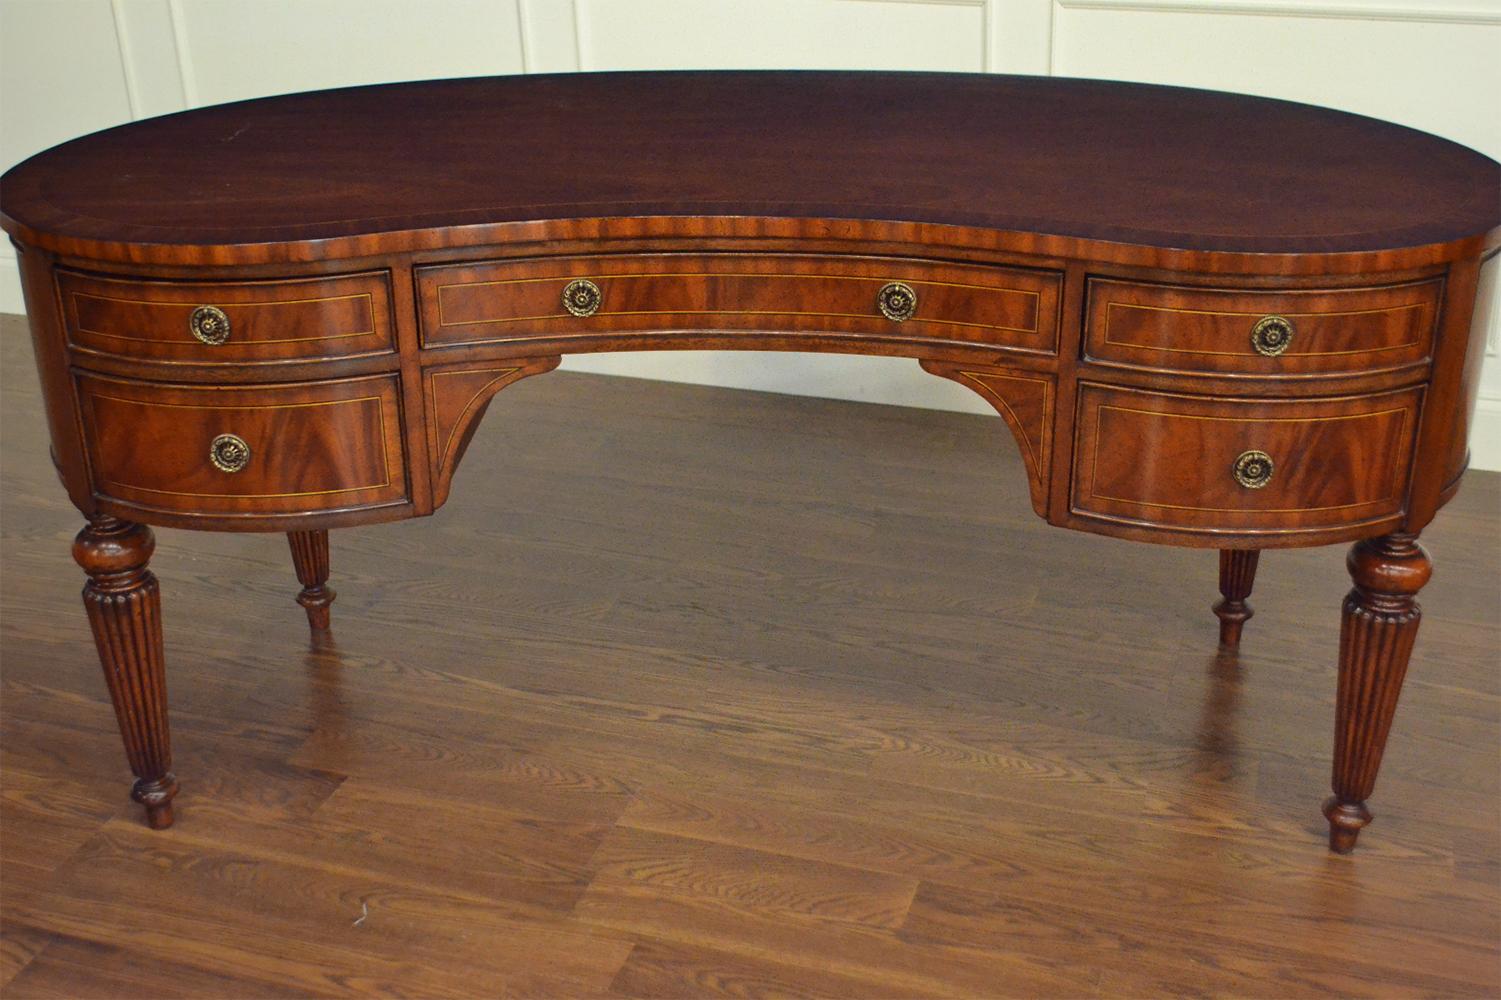 Regency Sheraton Style Kidney Shaped Writing Desk by Leighton Hall For Sale